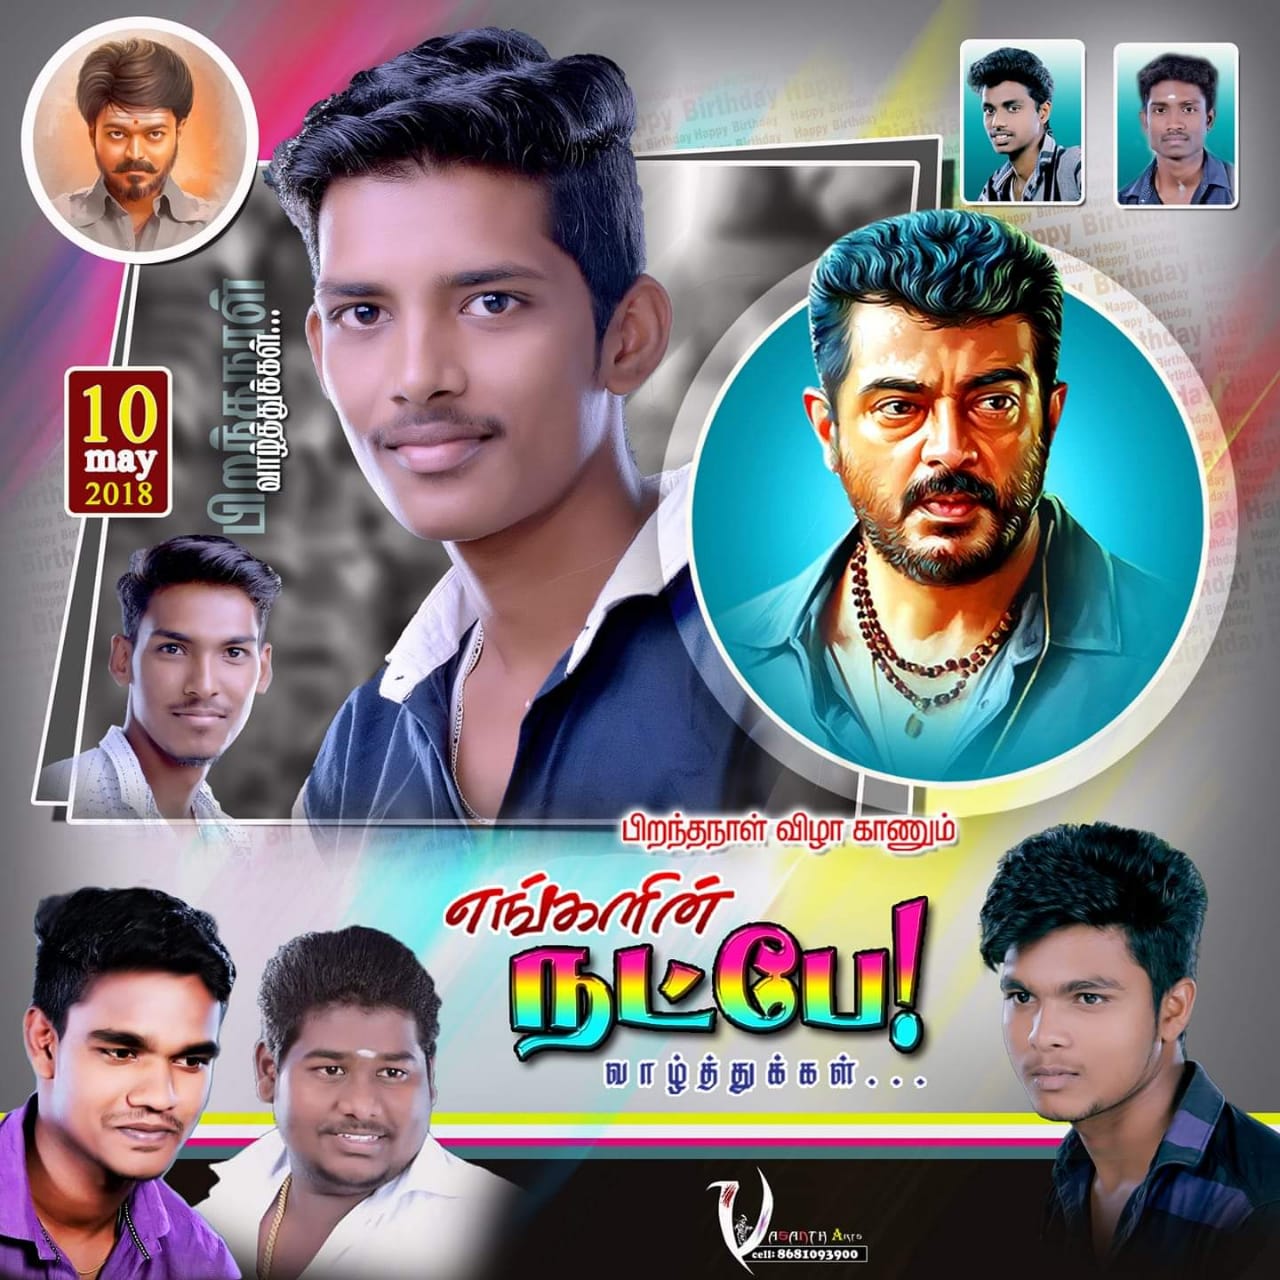 Birthday Poster Psd Free Download Kumaran Network Flex printing,wedding banners, birthday banners, political banners, occasional banners, farewell banners,multicolour designing & printing. birthday poster psd free download